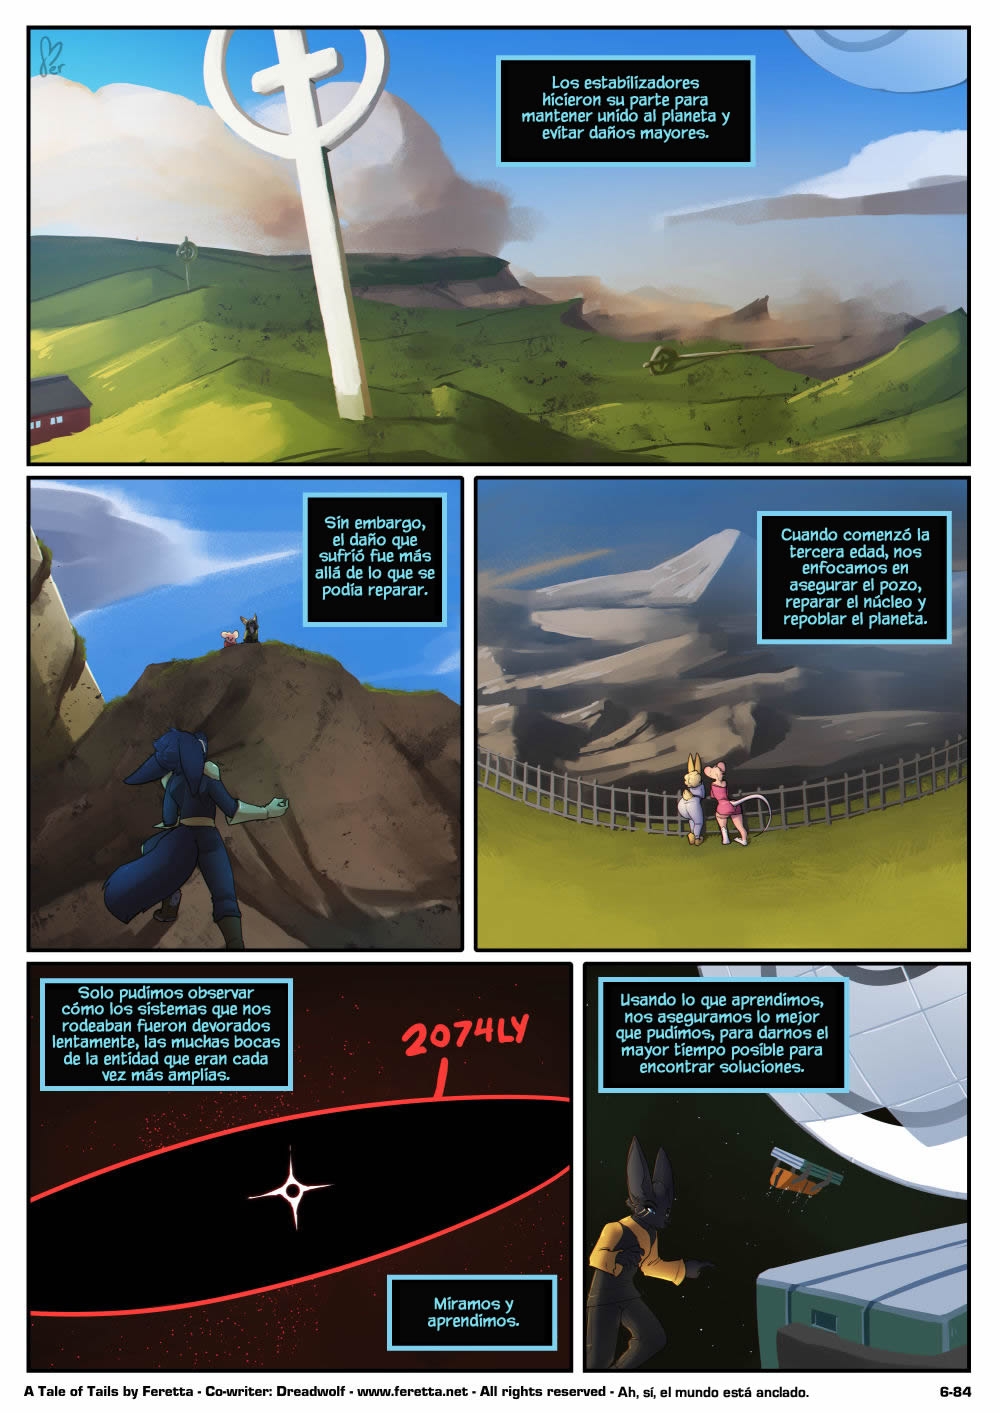 [Feretta] A Tale of Tails: Chapter 6 - Paths converge / Los caminos convergen [Spanish] [Red Fox Makkan] 84